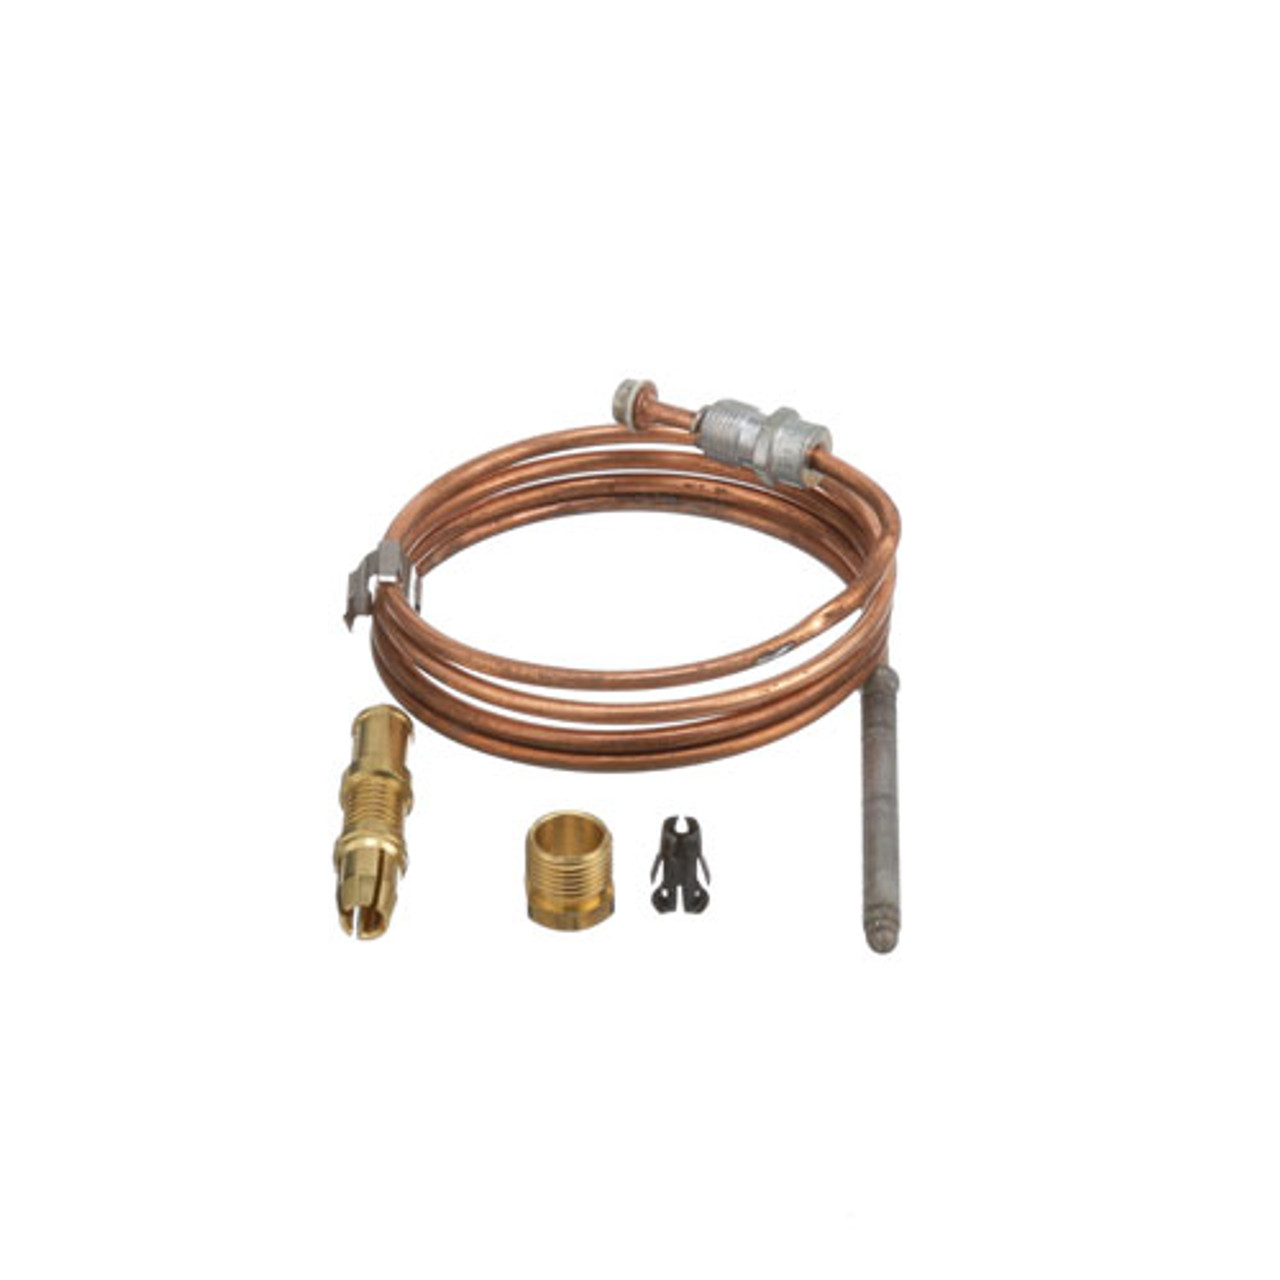 Thermocouple - 36" - Replacement Part For Ember Glo 844202